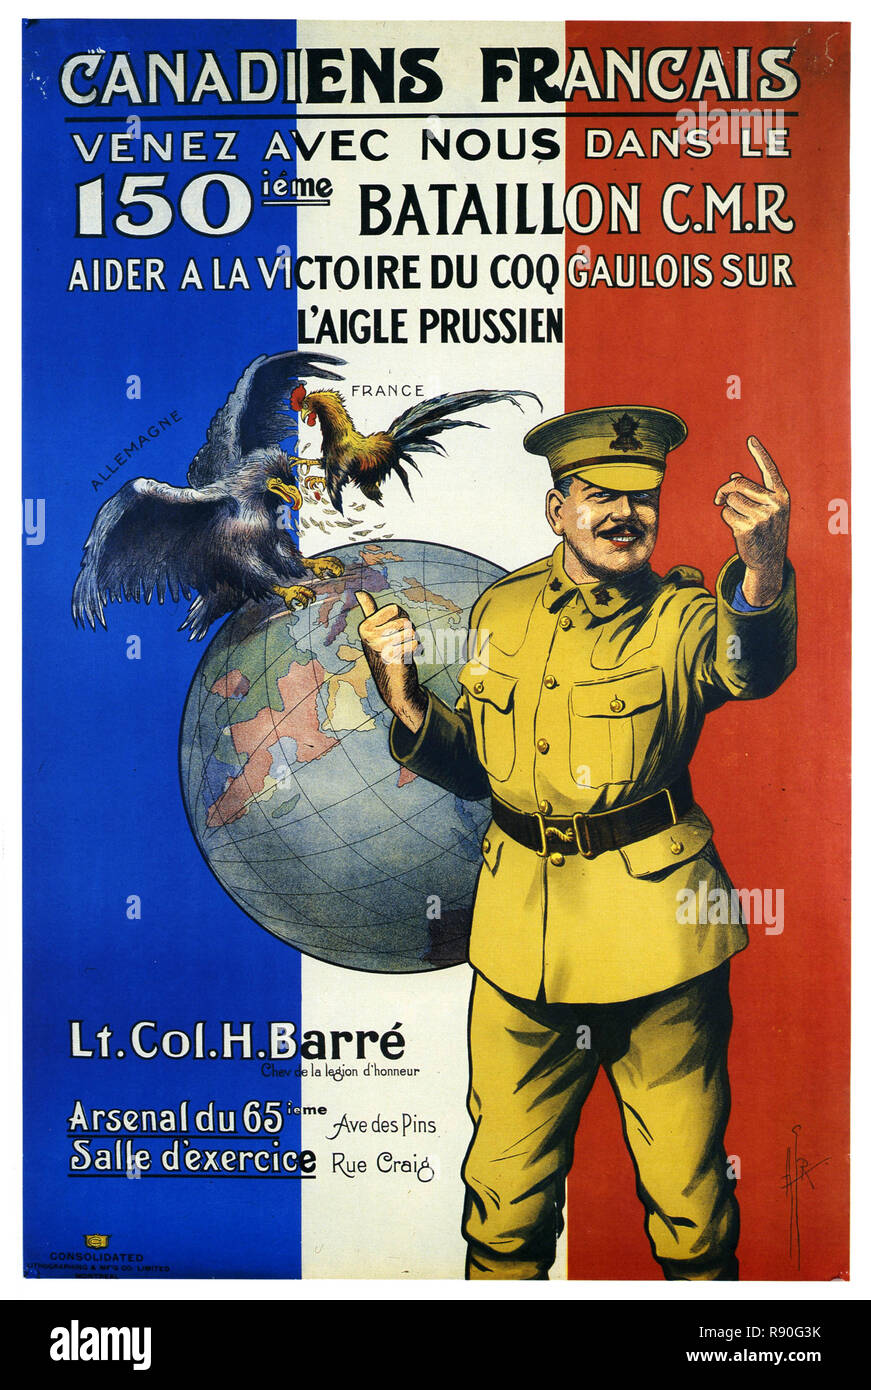 Help The French Rooster In Its Victory Over The Prussian Eagle - Vintage French Canadian Propaganda Poster WWI Stock Photo